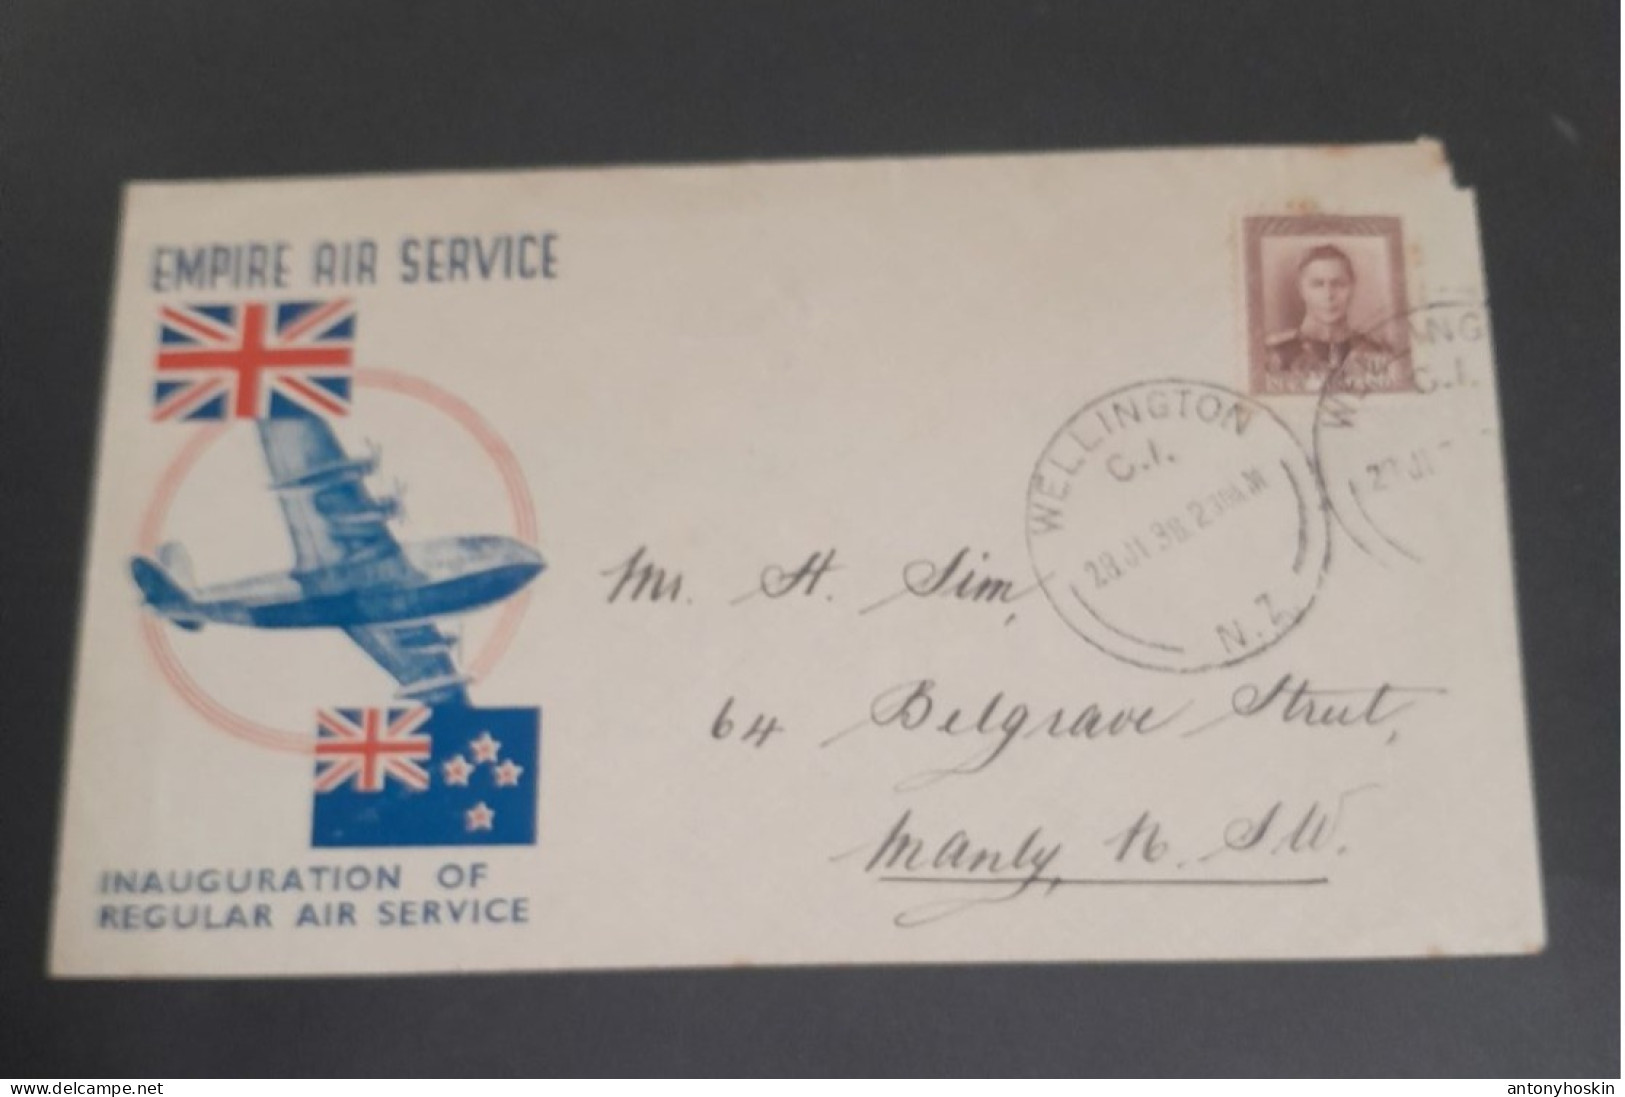 28 July 1938 Empire Air Service Inauguration Of Regular Air Service - Luftpost